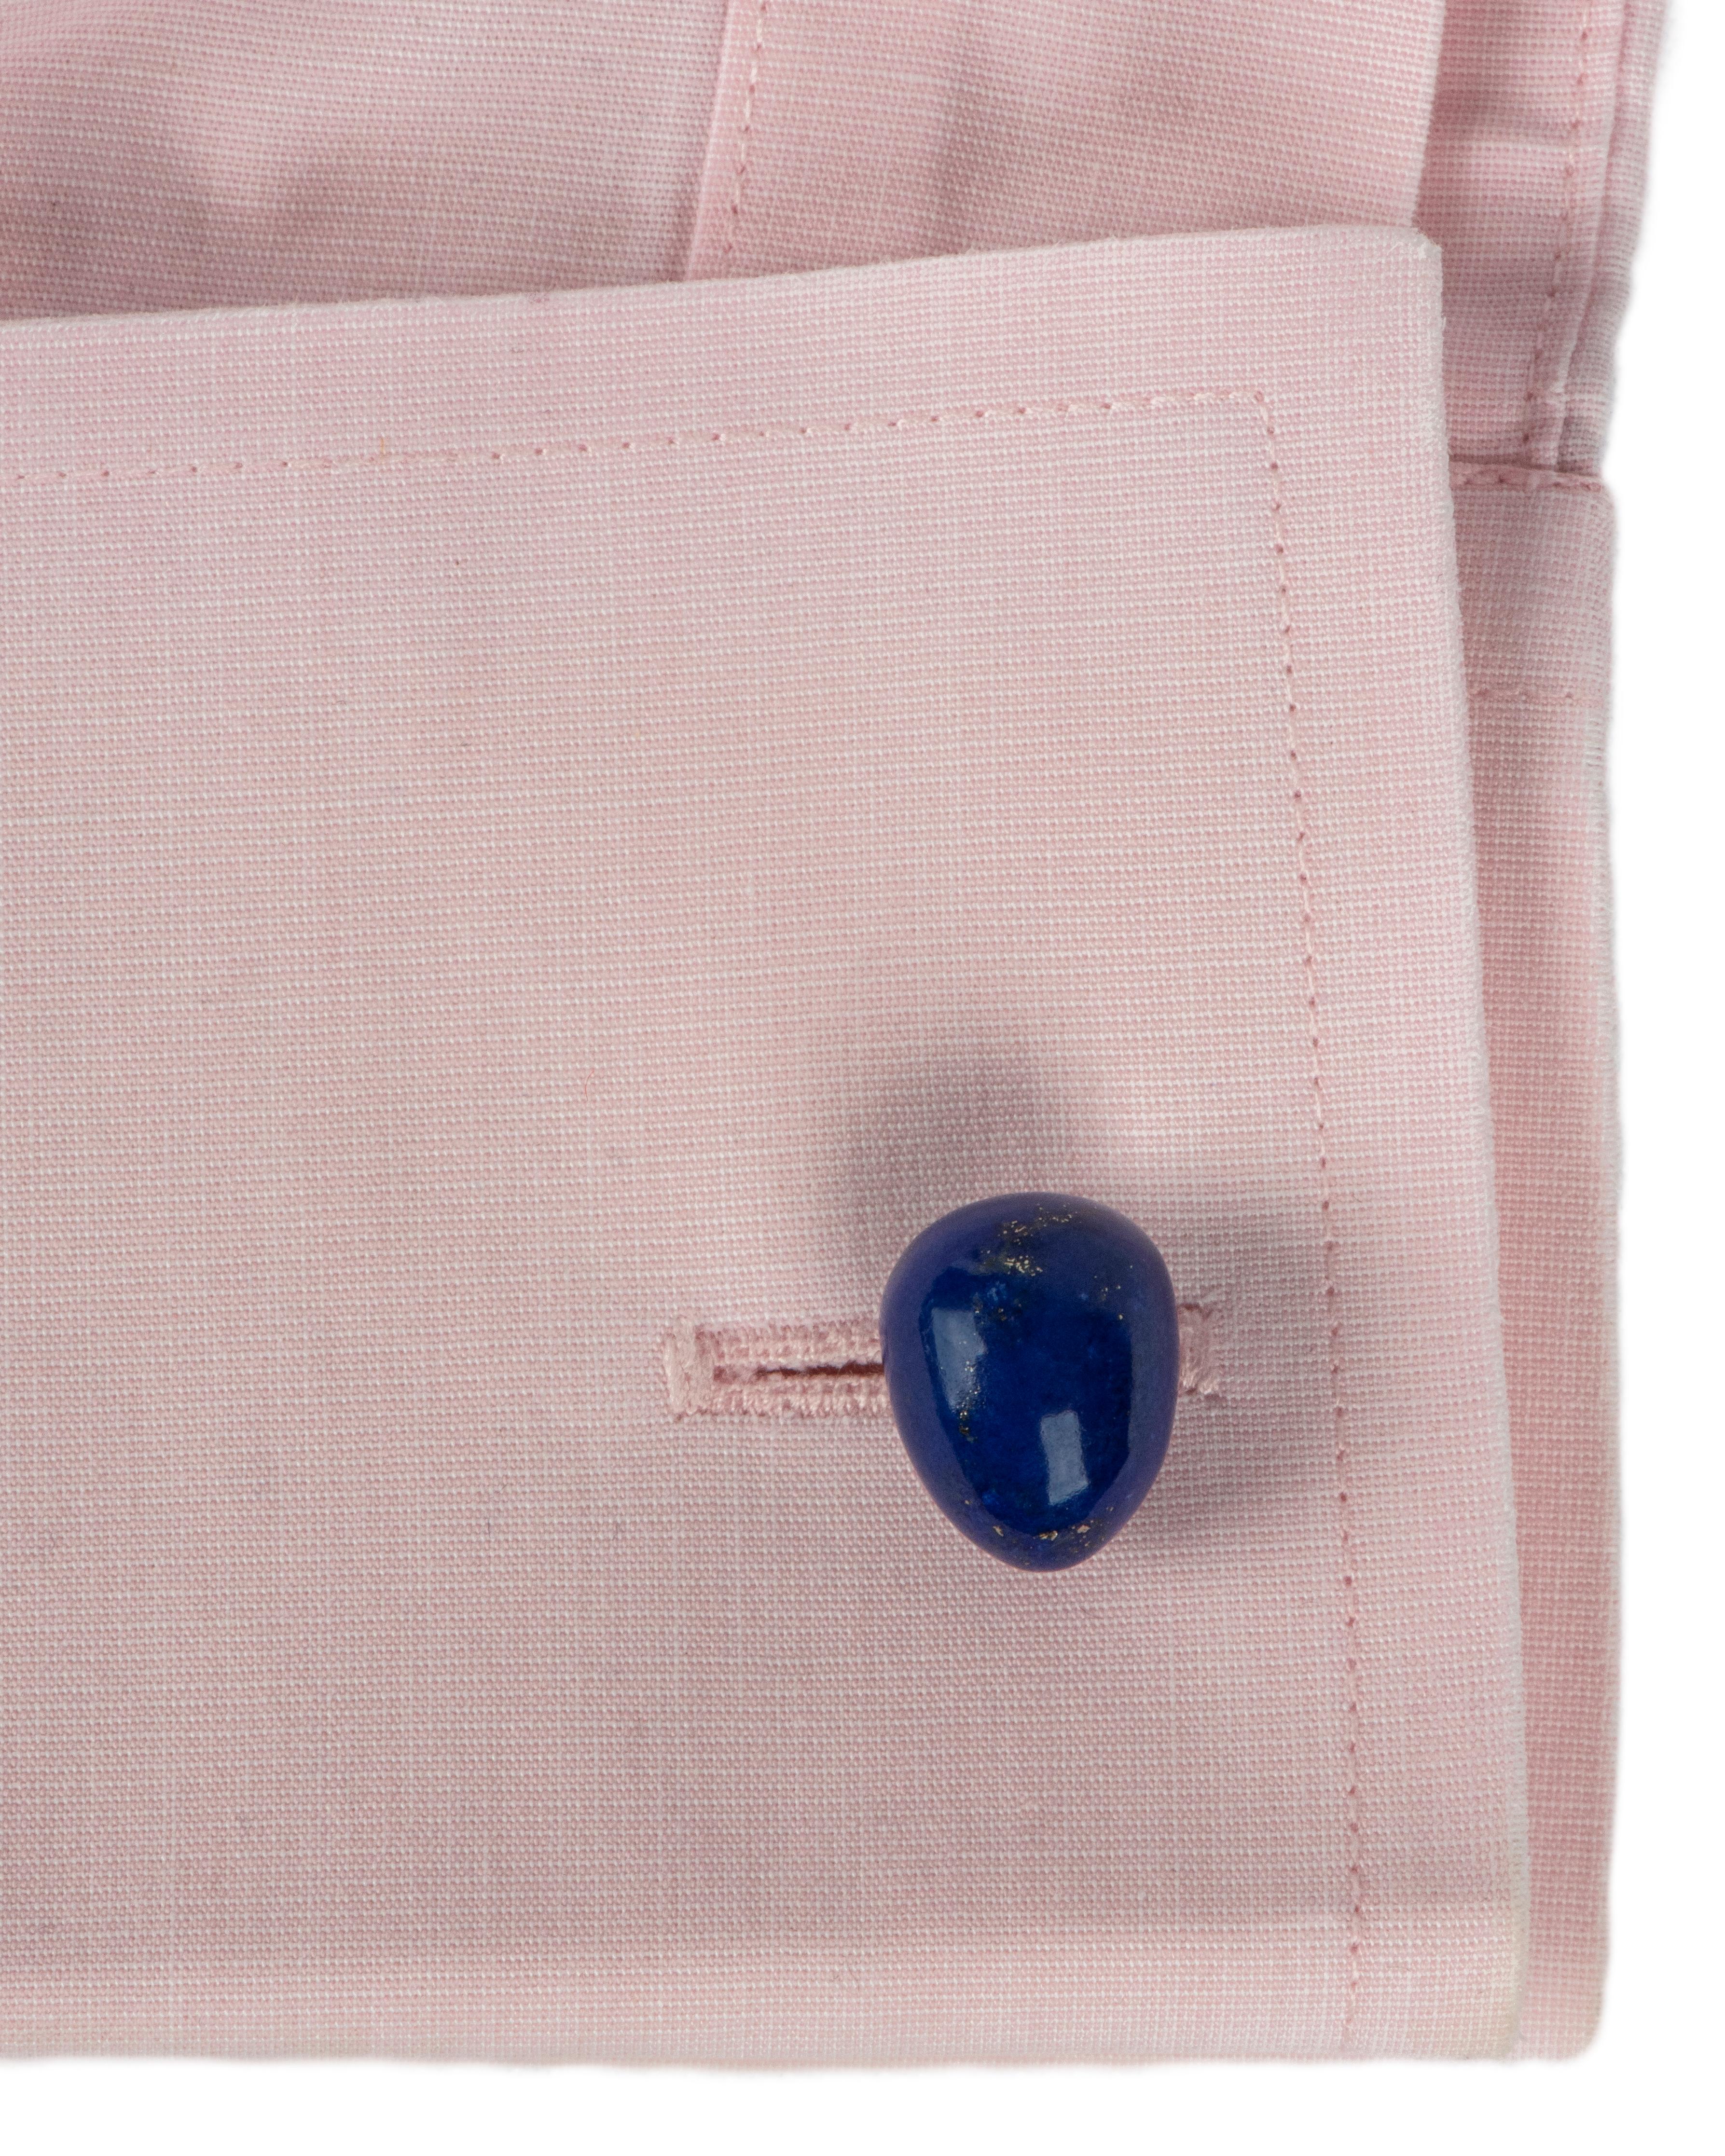 Cabochon Russian Lapis Lazuli Gold Egg Cufflinks by Marie Betteley For Sale